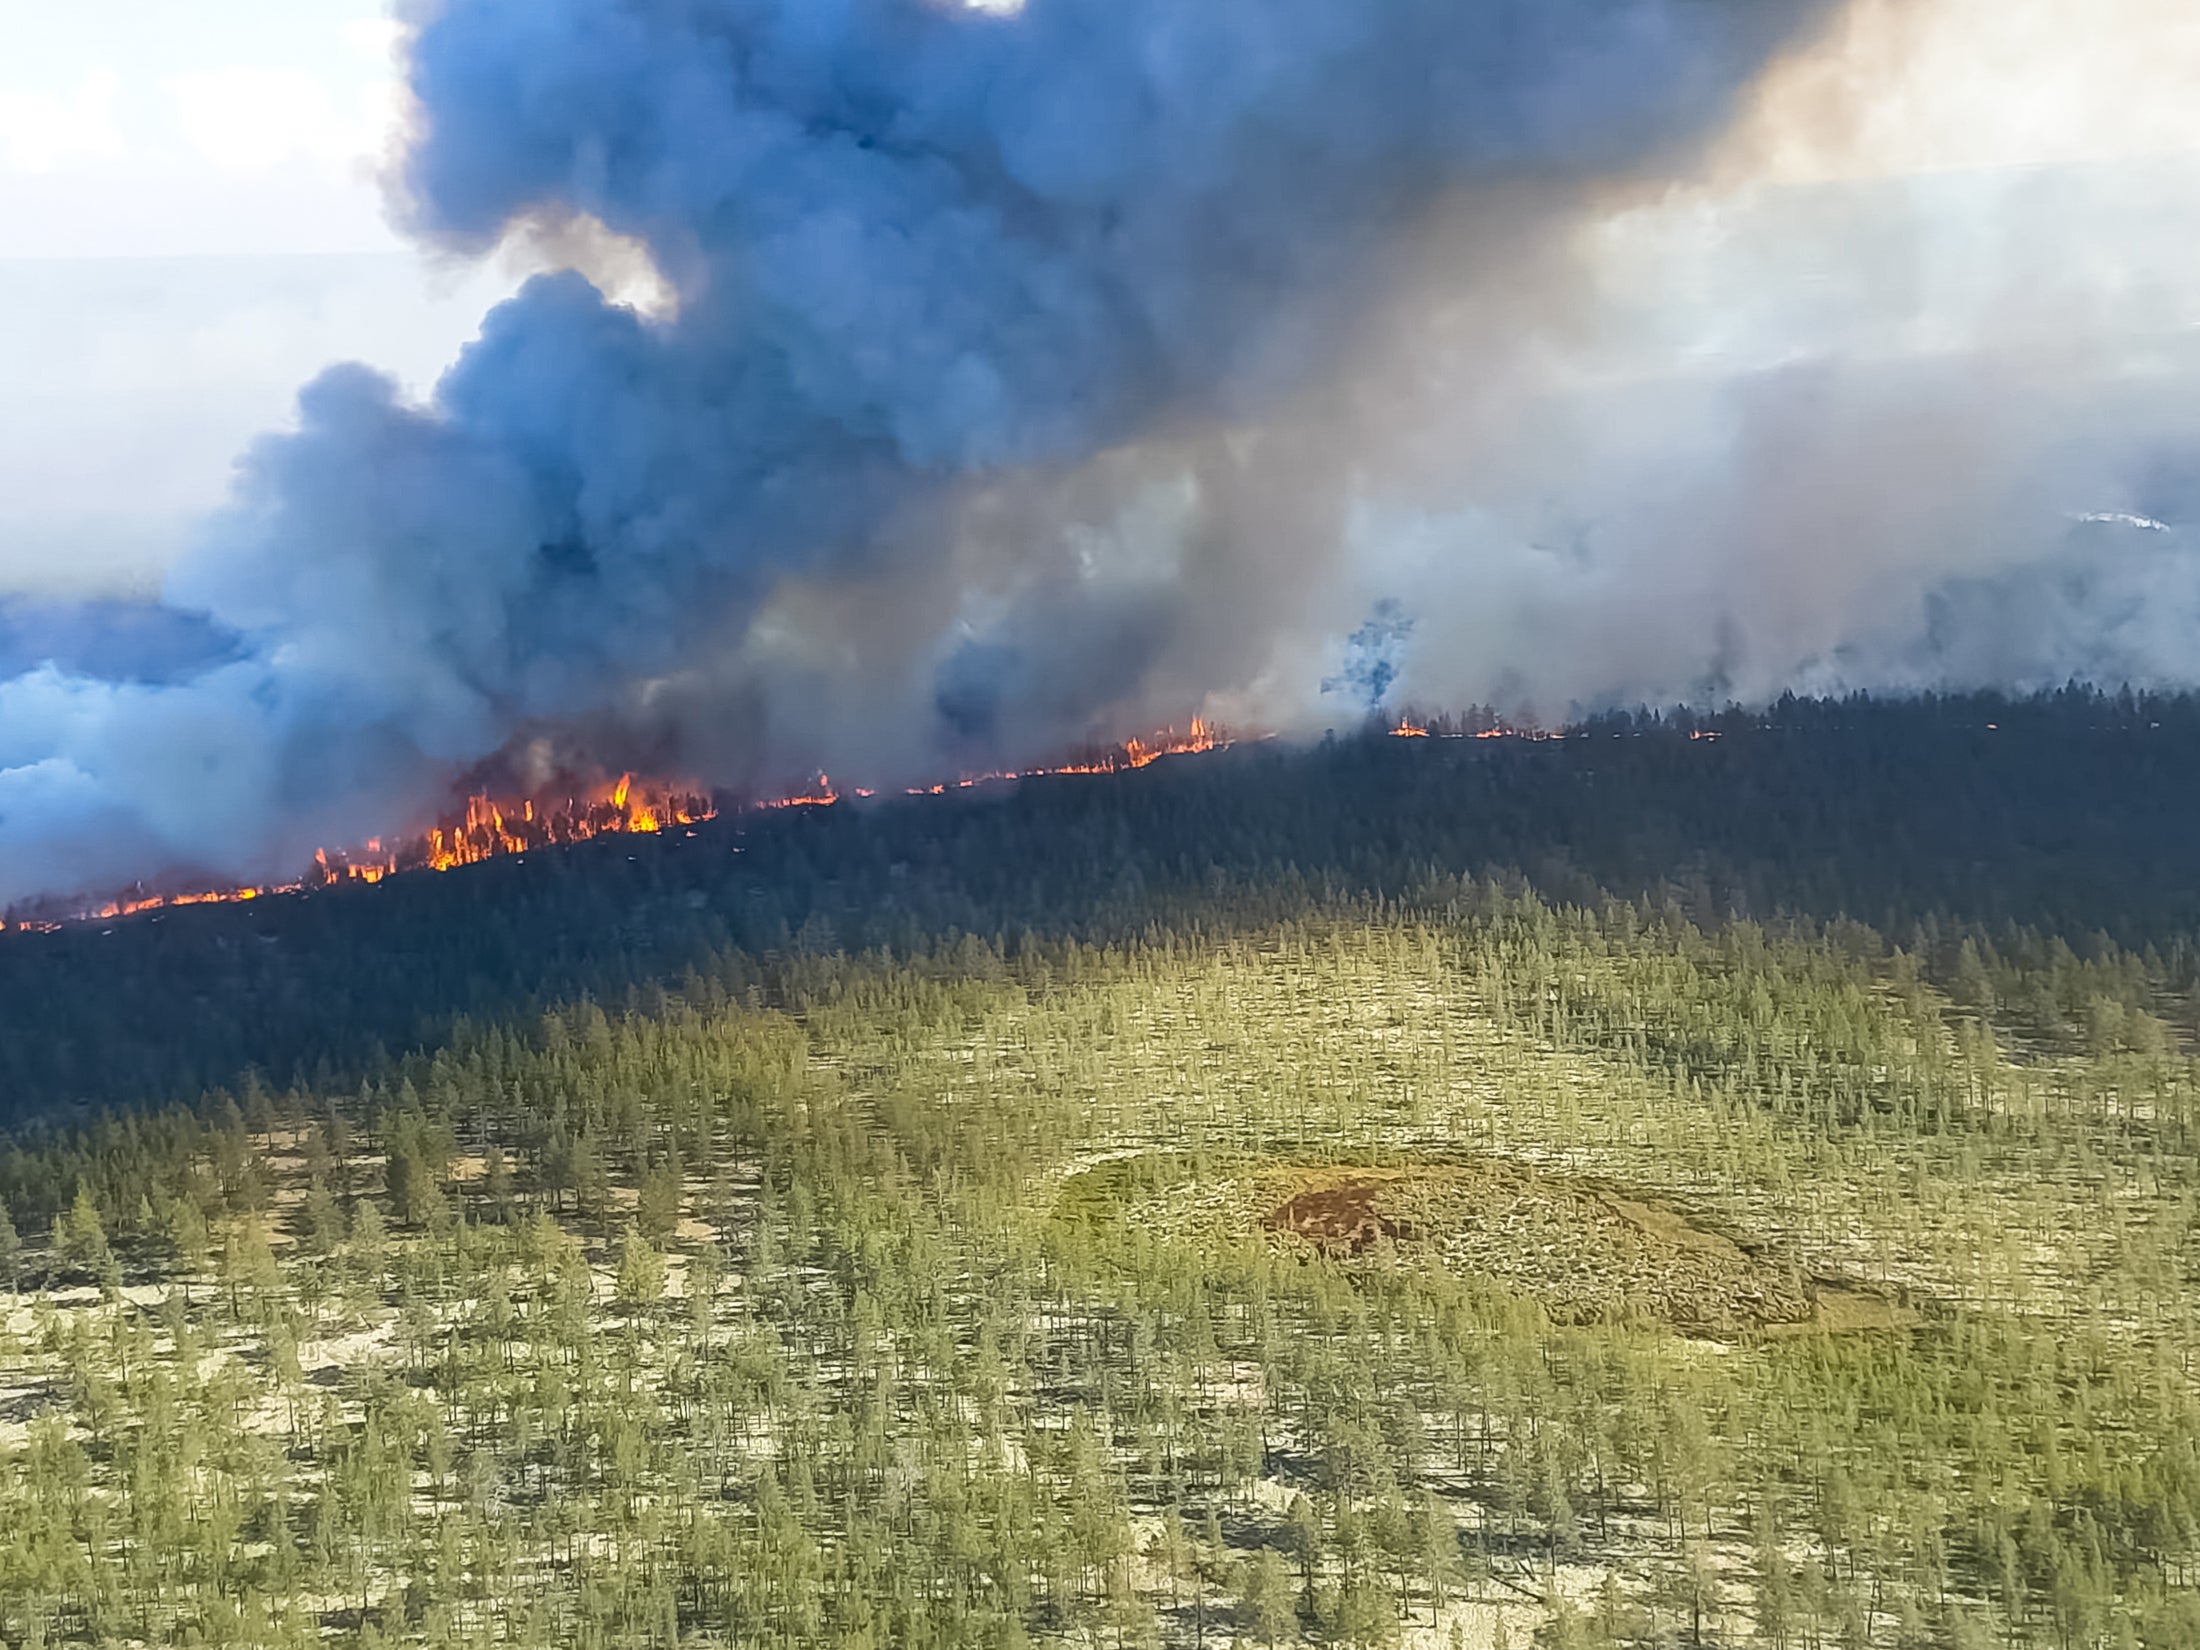 Wildfires in Siberia ripped through around 15 million hectares in 2019 and this year the damage is already worse than at the same time last year